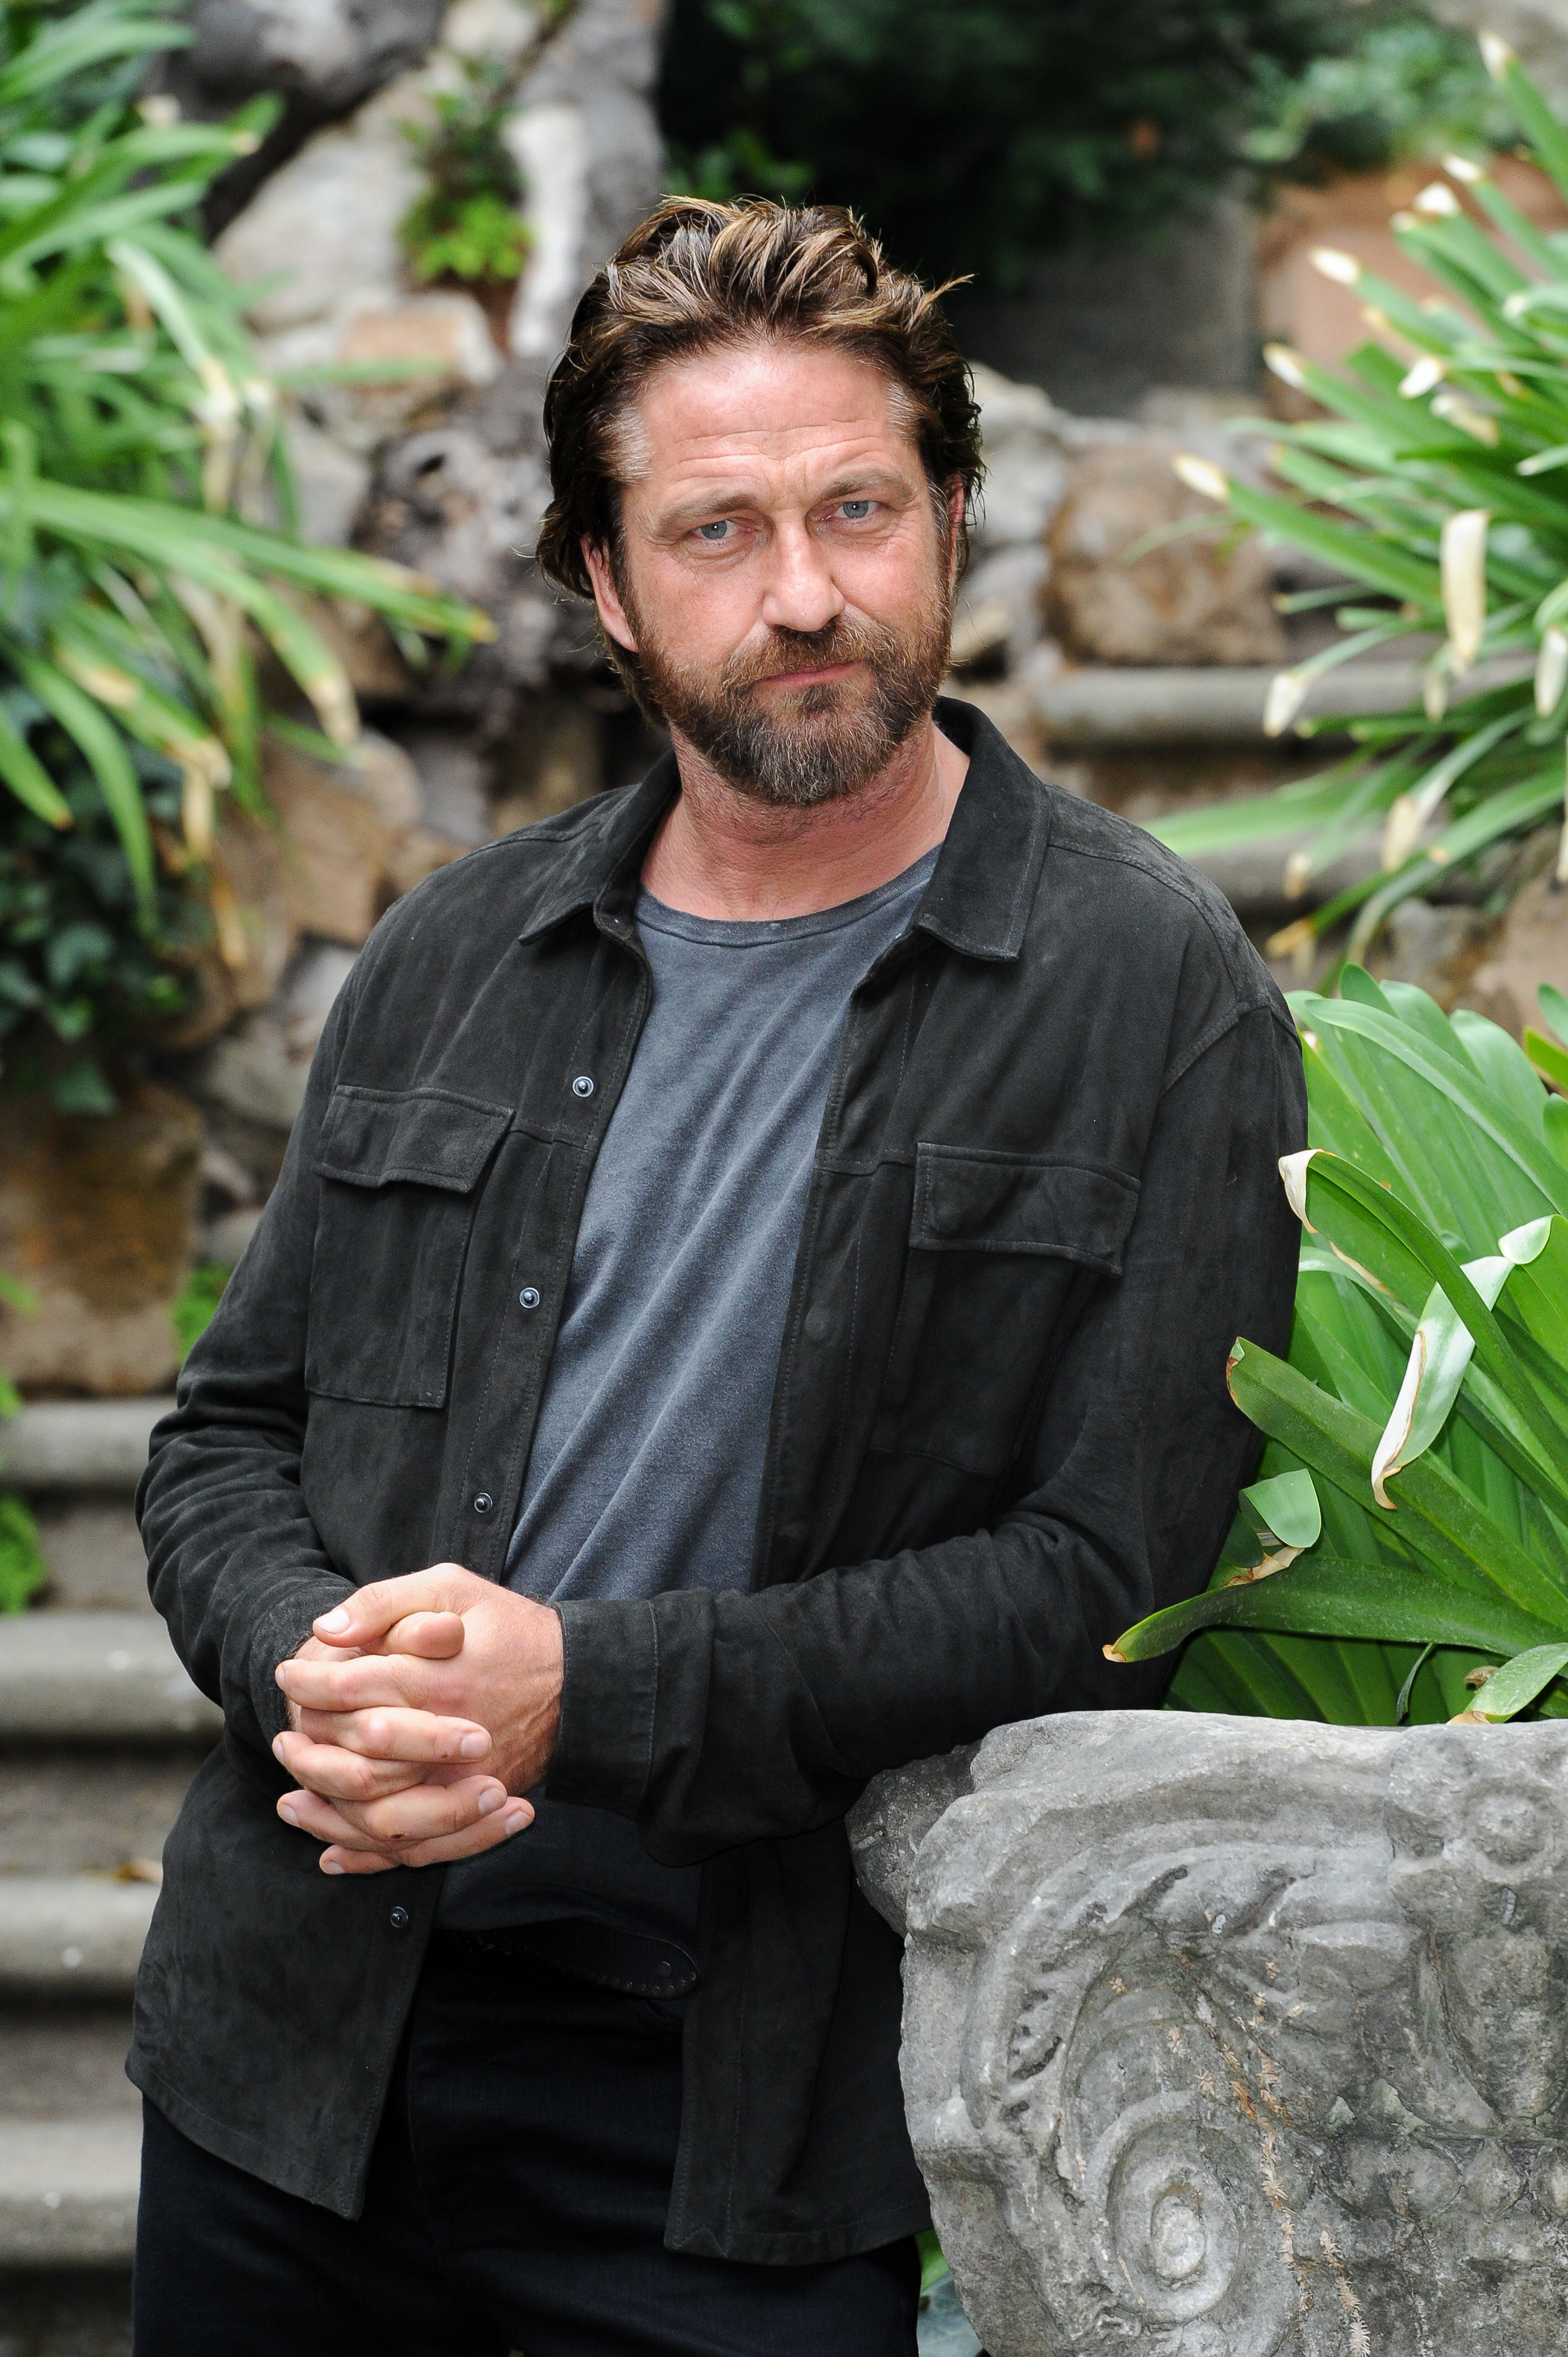 Gerard Butler photographed at the Hotel De Russie during the photocall of the film Geostorm